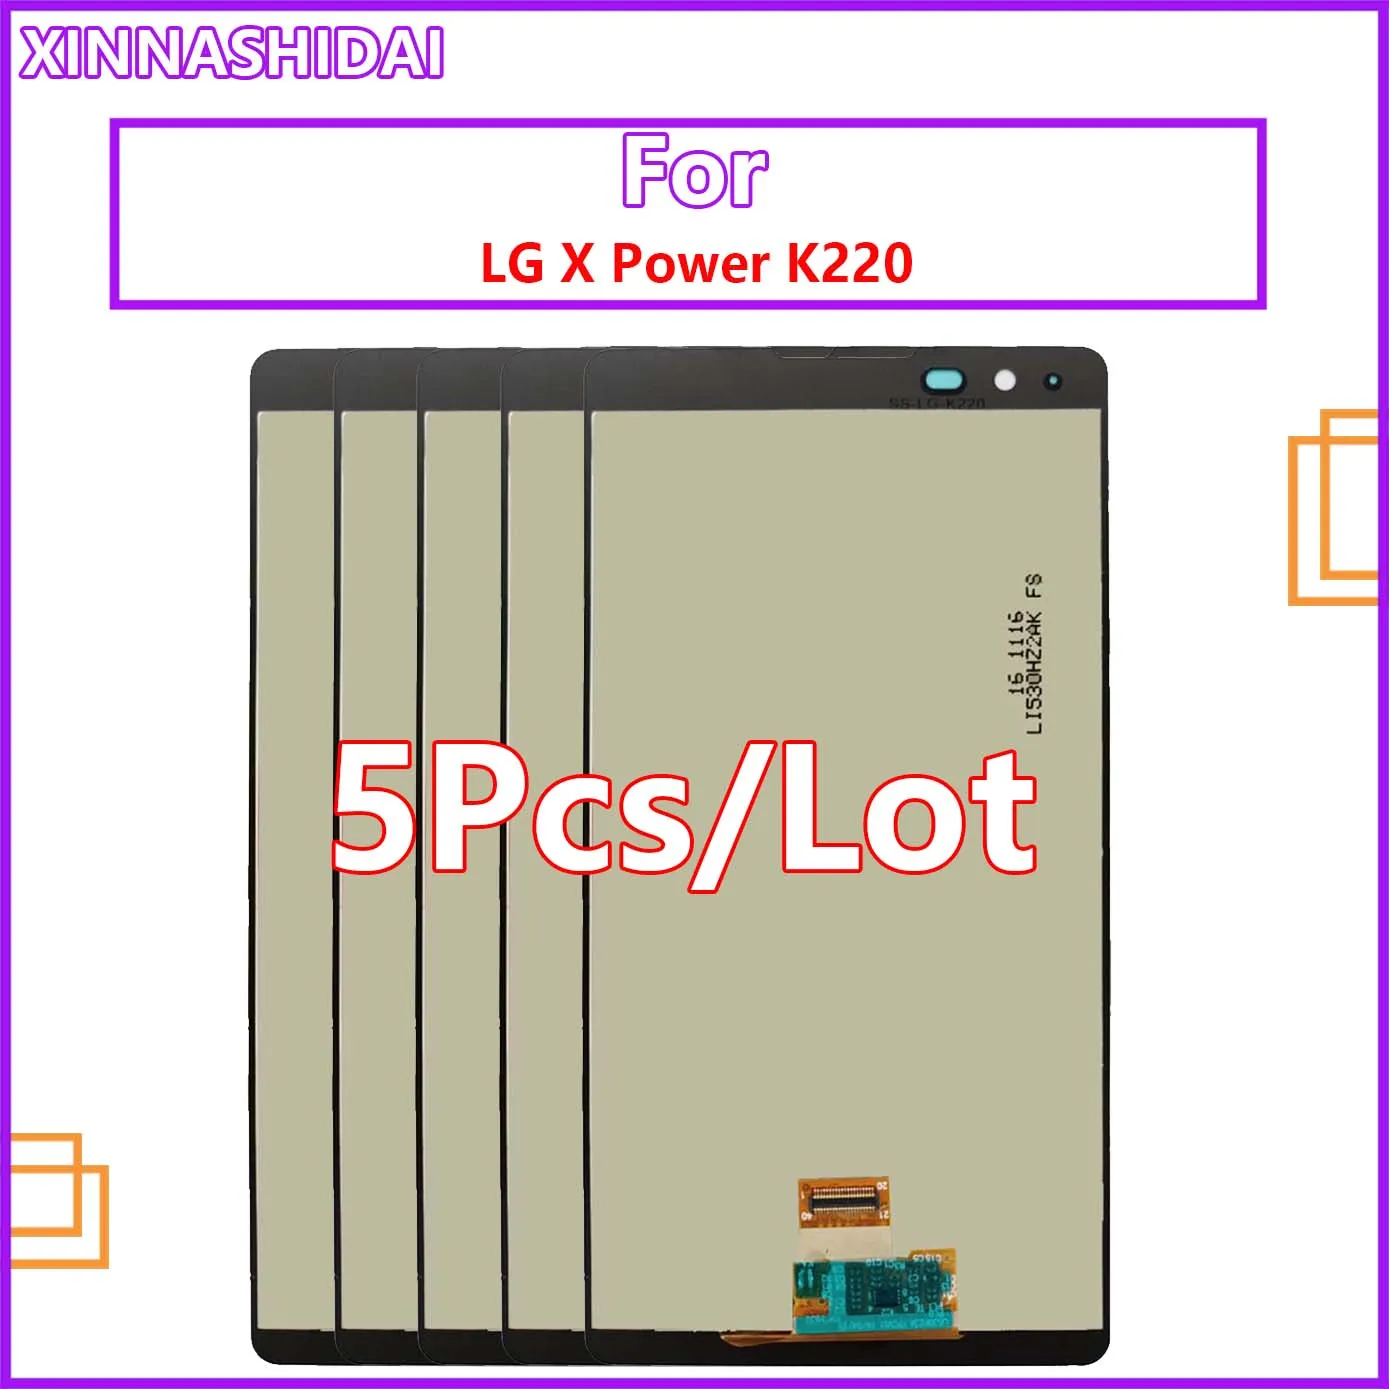 

5pcs/lot LCD Display For LG X Power K220 K220DS F750K LS755 X3 K210 US610 K450 LCD Display Touch Screen Digitizer Assembly